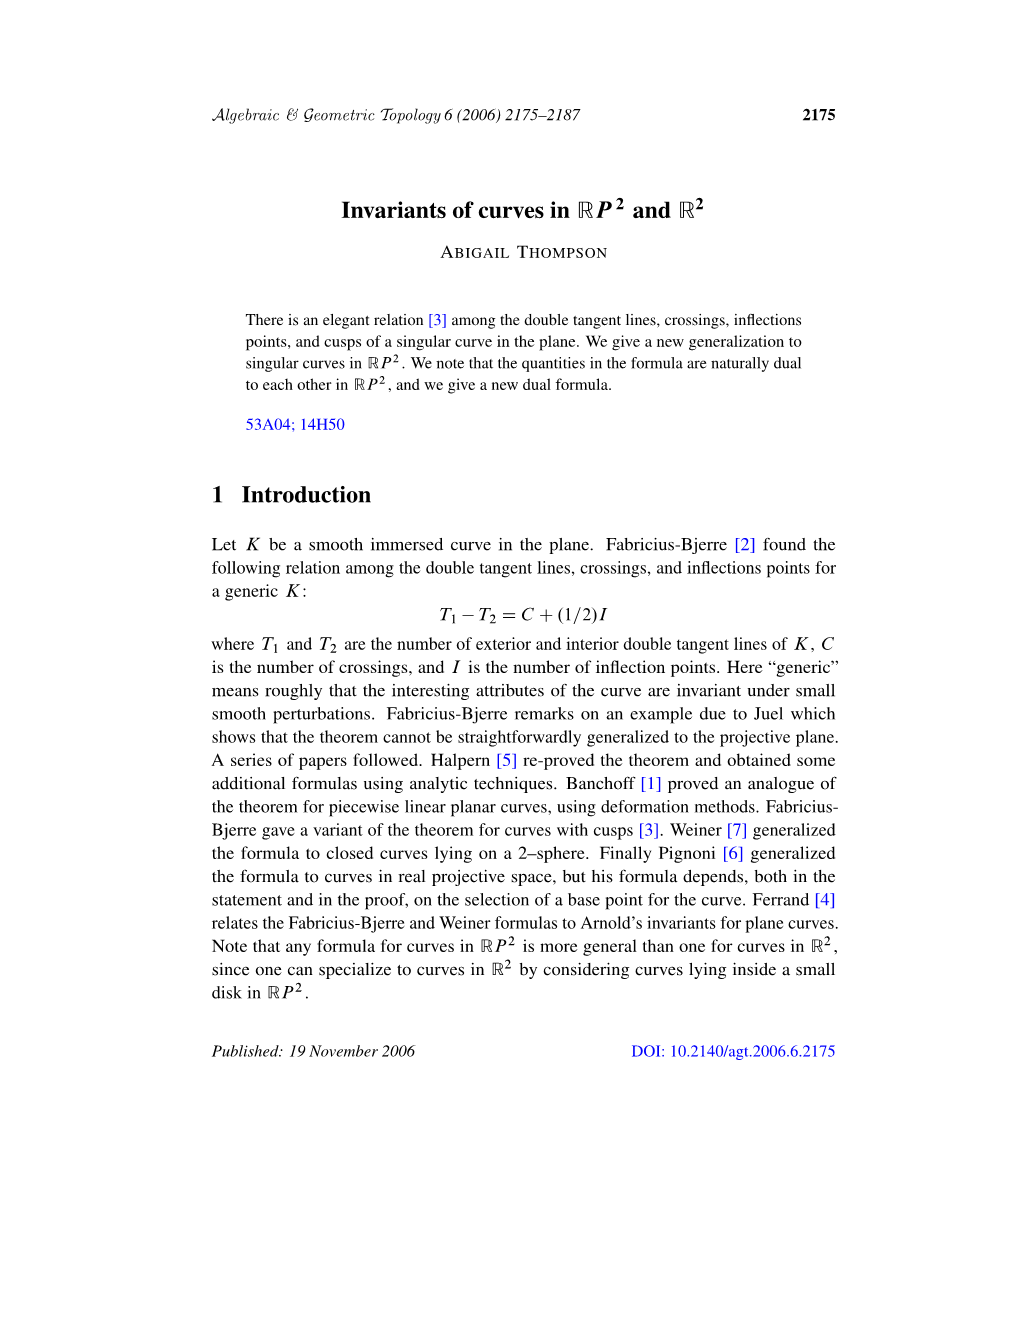 Invariants of Curves in RP2 and R2